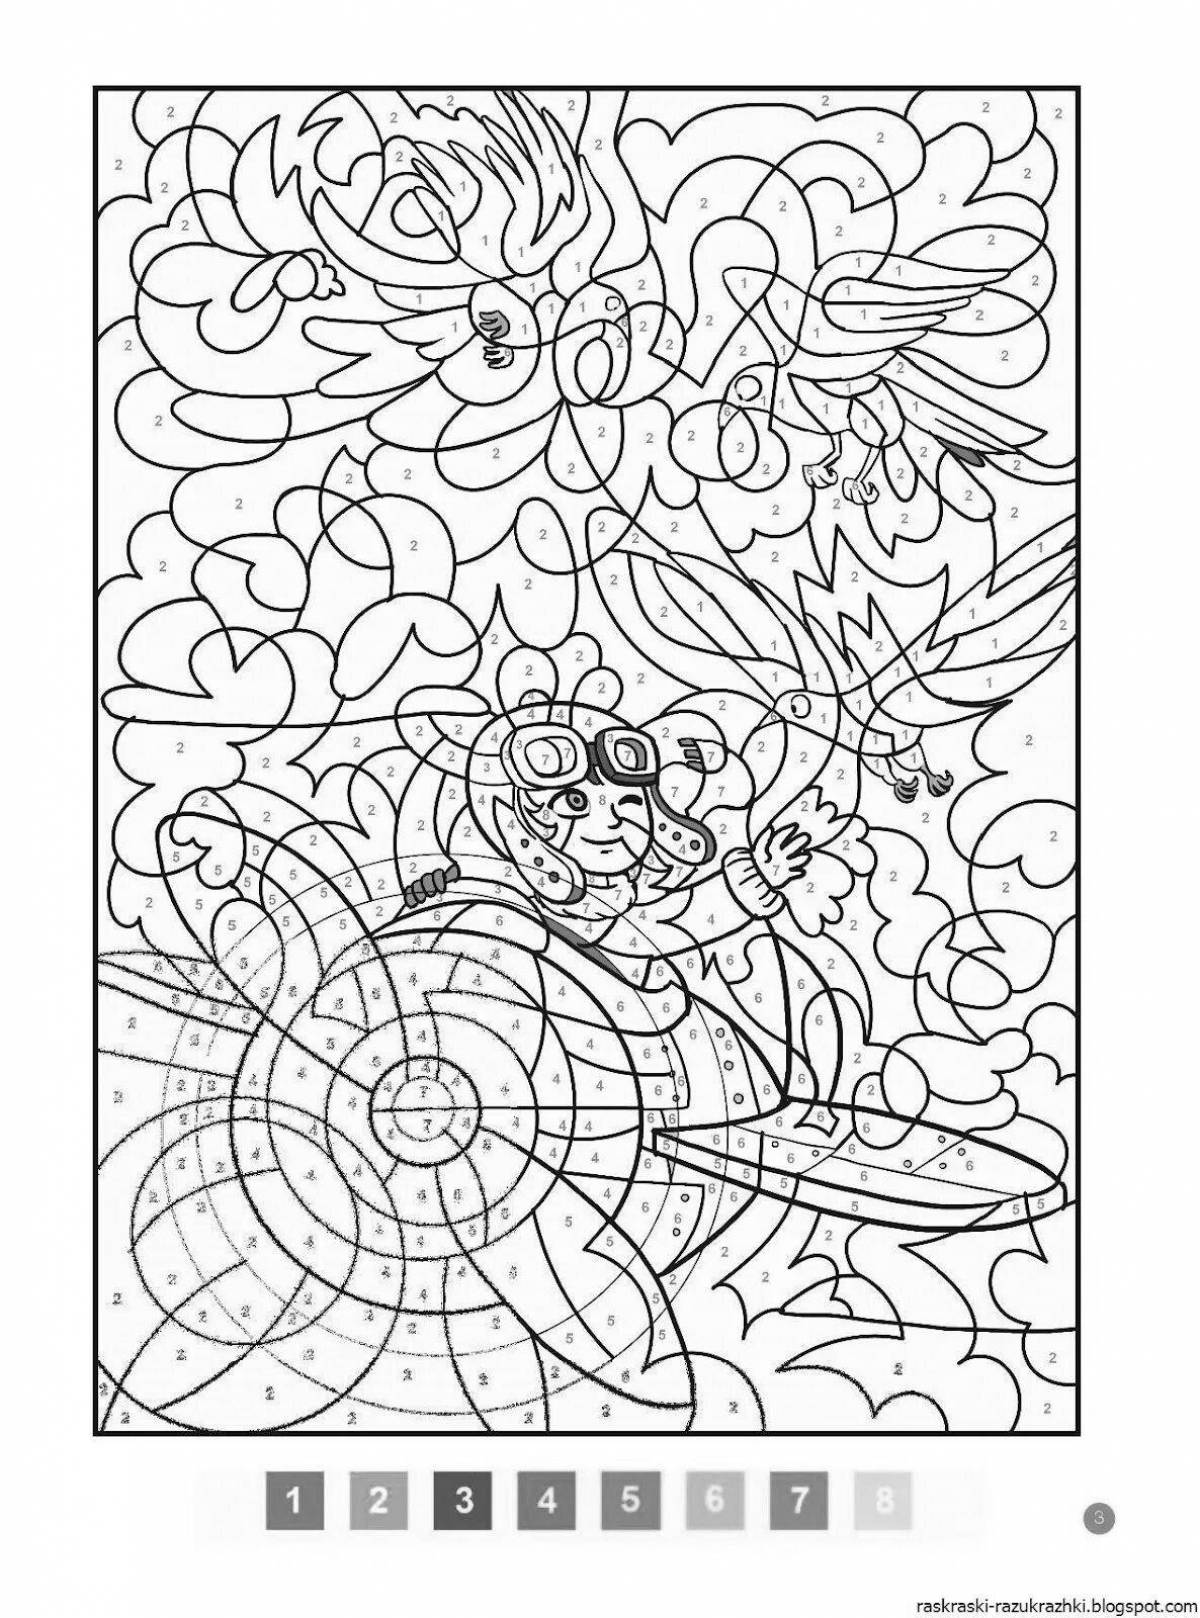 Colorful fun coloring by numbers